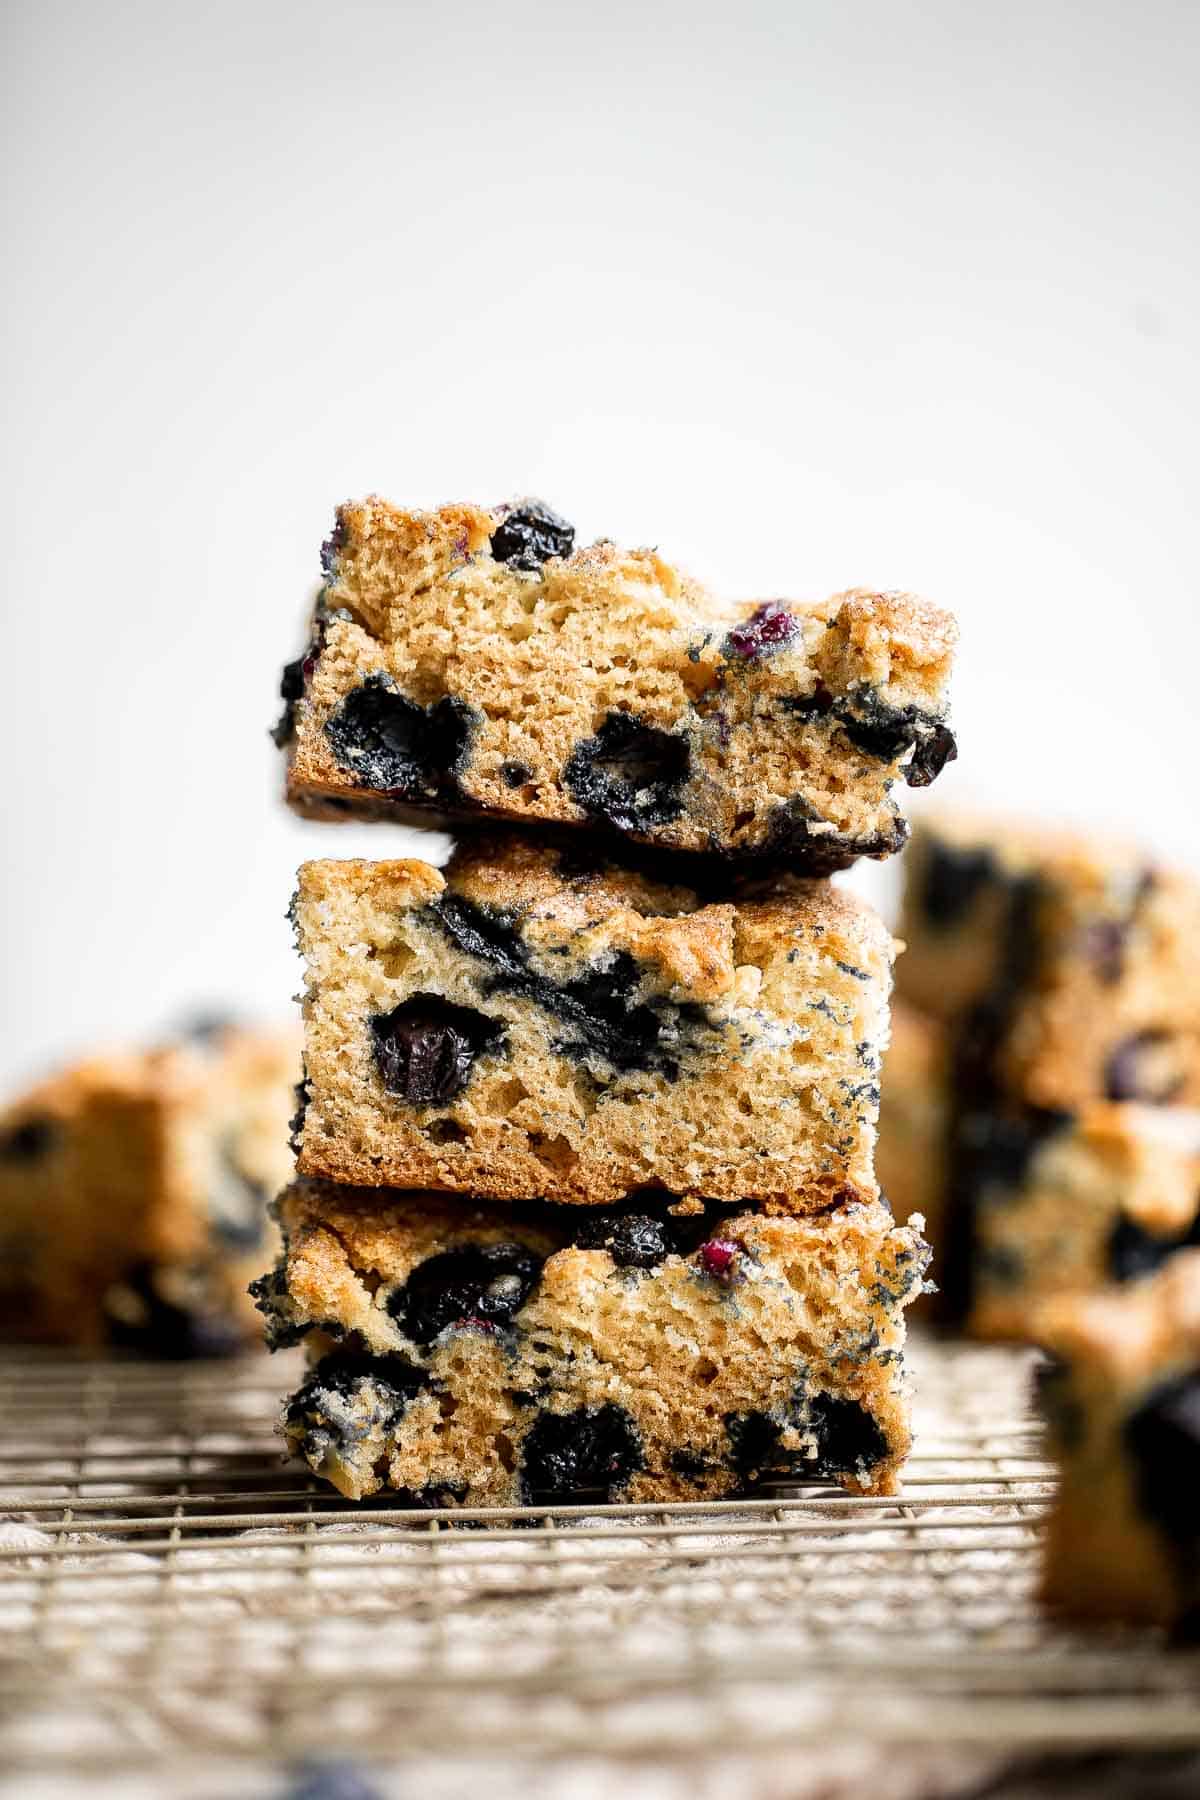 This Blueberry Cake is dense, moist, and chock-full of delicious blueberries with a dusting of cinnamon sugar on top. Prep this coffee cake in 10 minutes. | aheadofthyme.com